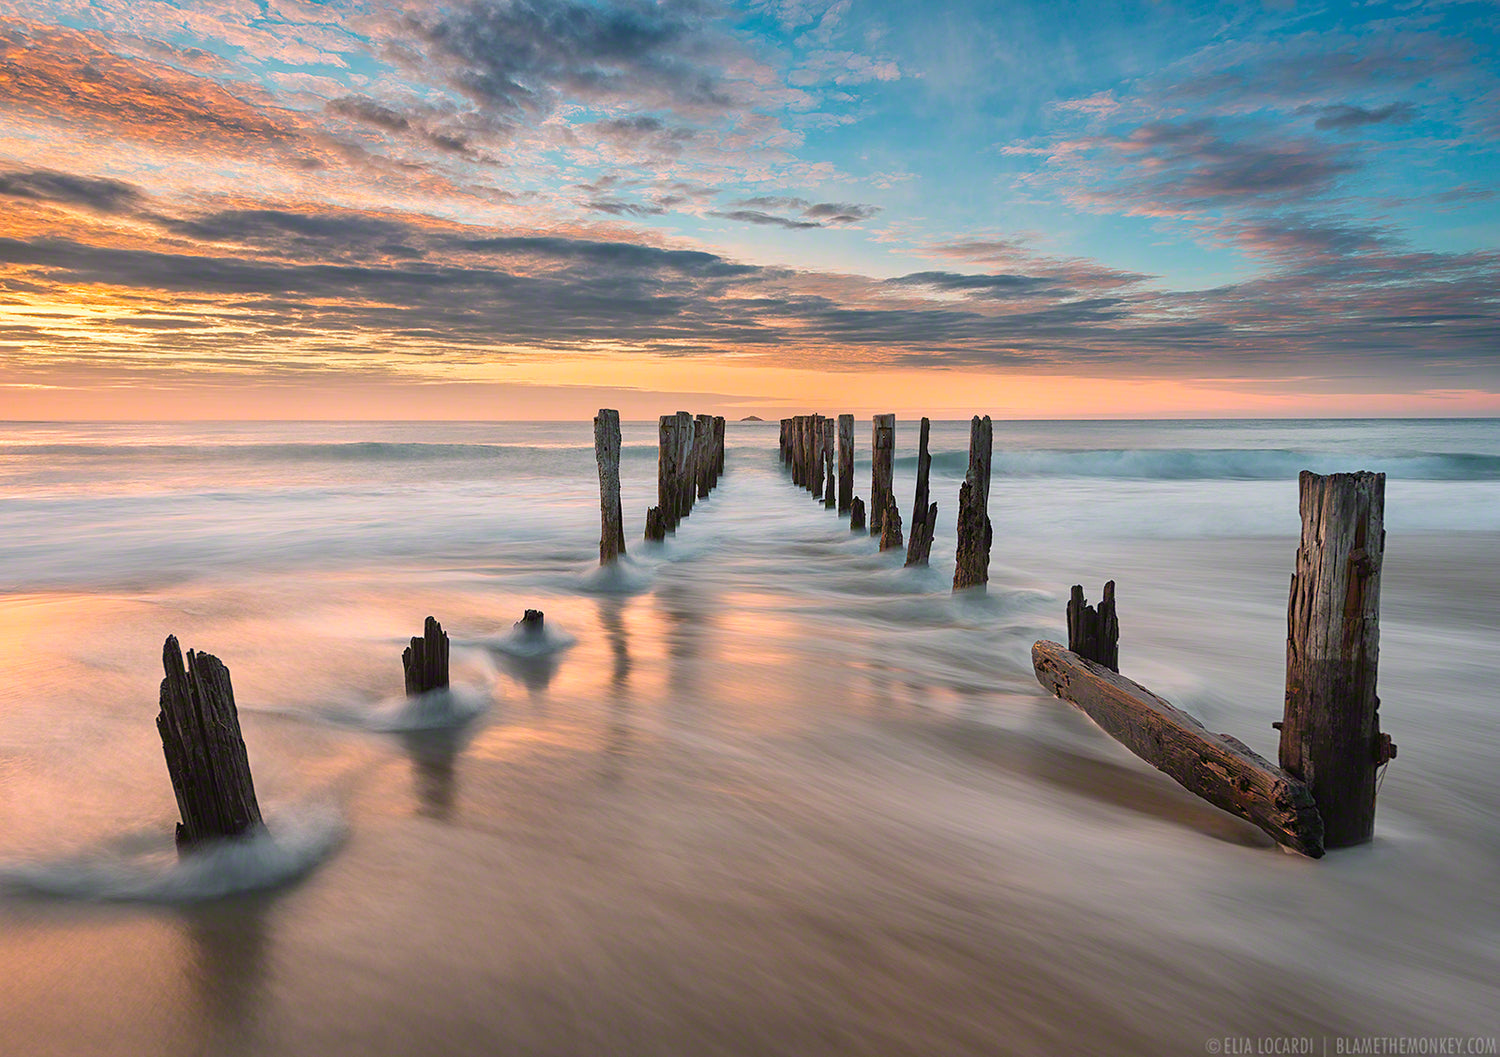 An ocean sunset of blurry waves in motion through the rotting wooden pylons of a collapsed dock